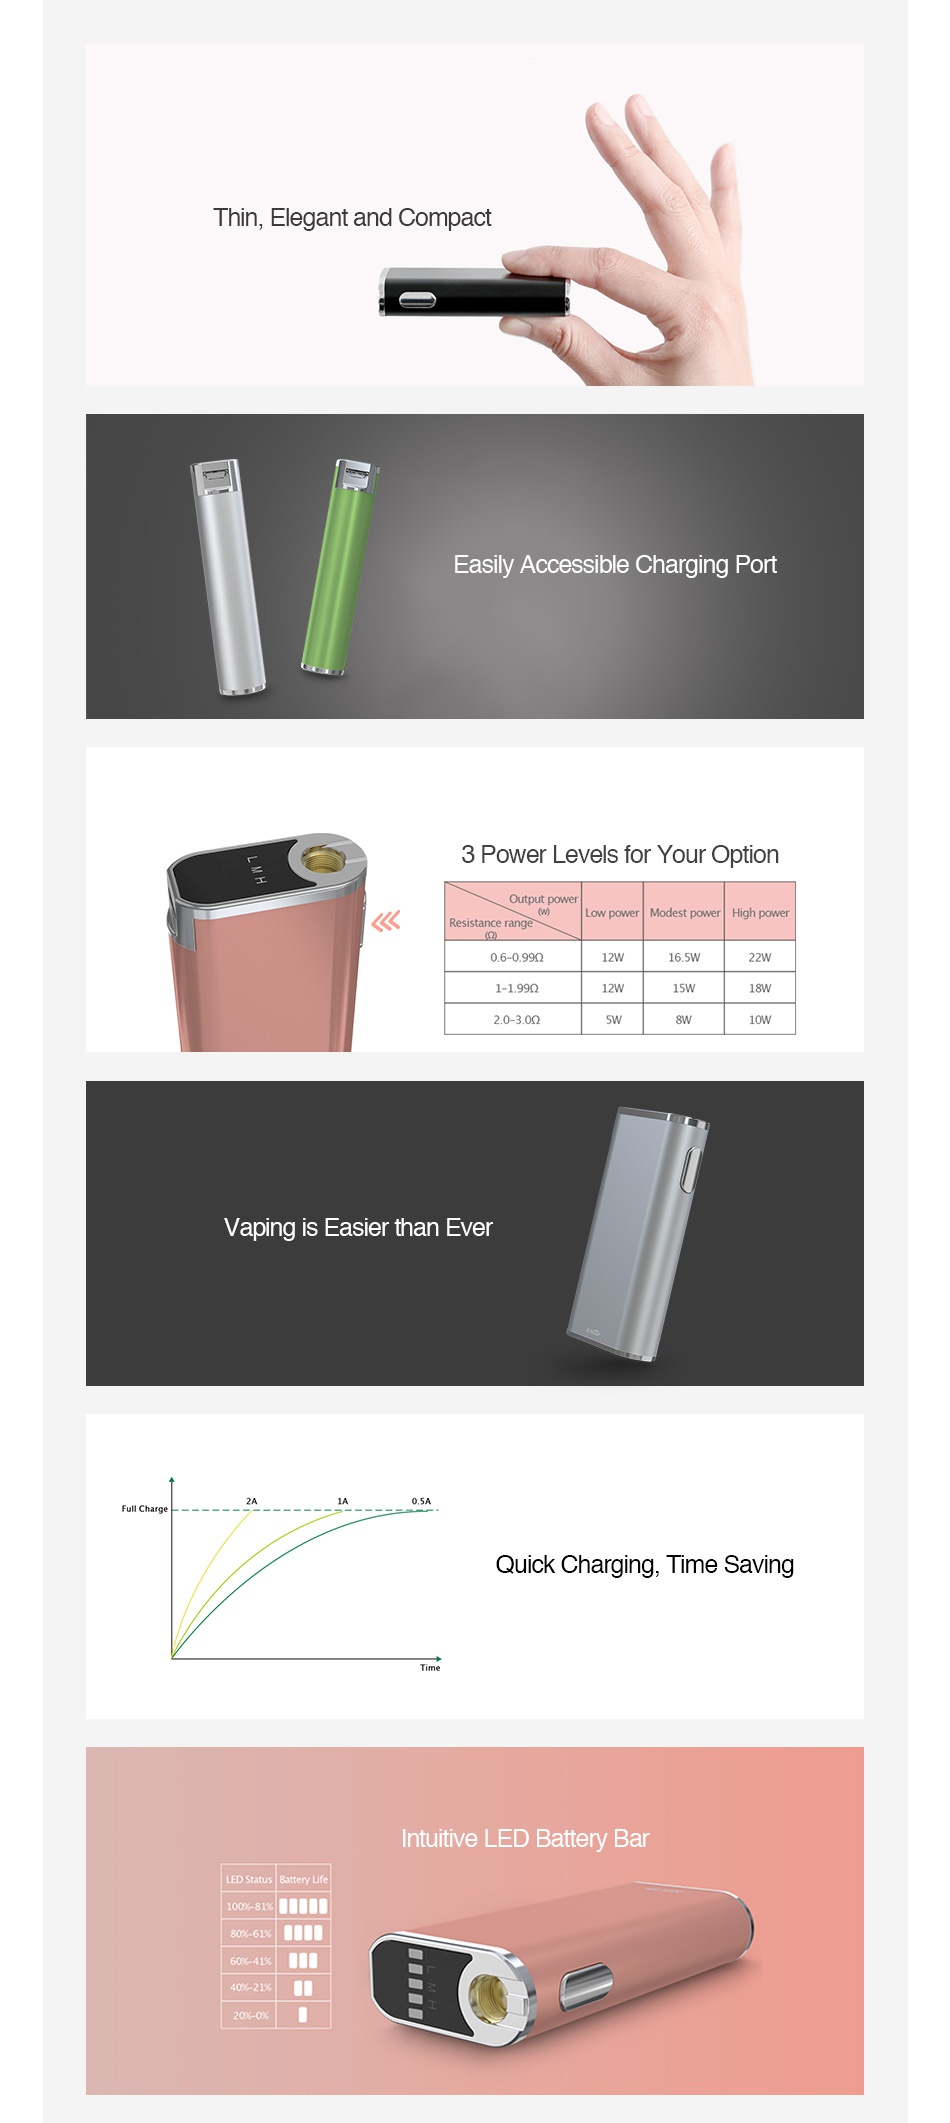 Eleaf iStick Trim Battery 1800mAh Thin  Elegant and Compact Easily Accessible Charging Port 3 Power Levels for Your Option ow power Modest power High power 0 6 0 990 22W 8W 10w Vaping is easier than ever Quick Charging I ime Saving Intuitive LED Battery Bar LED Status Battery Life 0081x 80x6    6041  4021